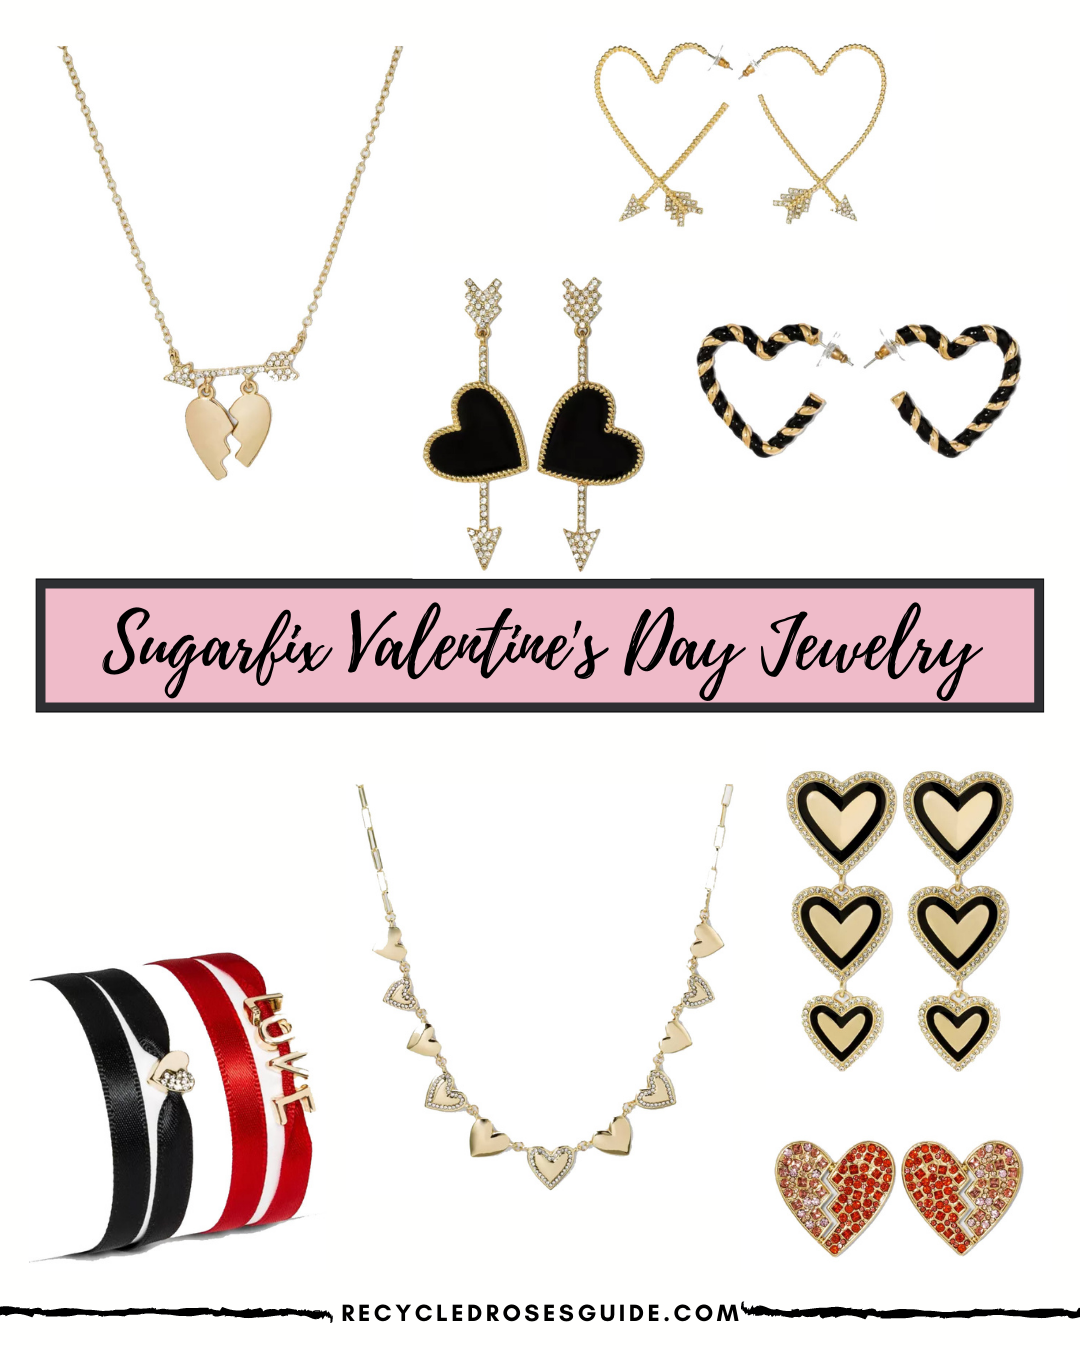 Valentine's Day 2021 Gift Guide